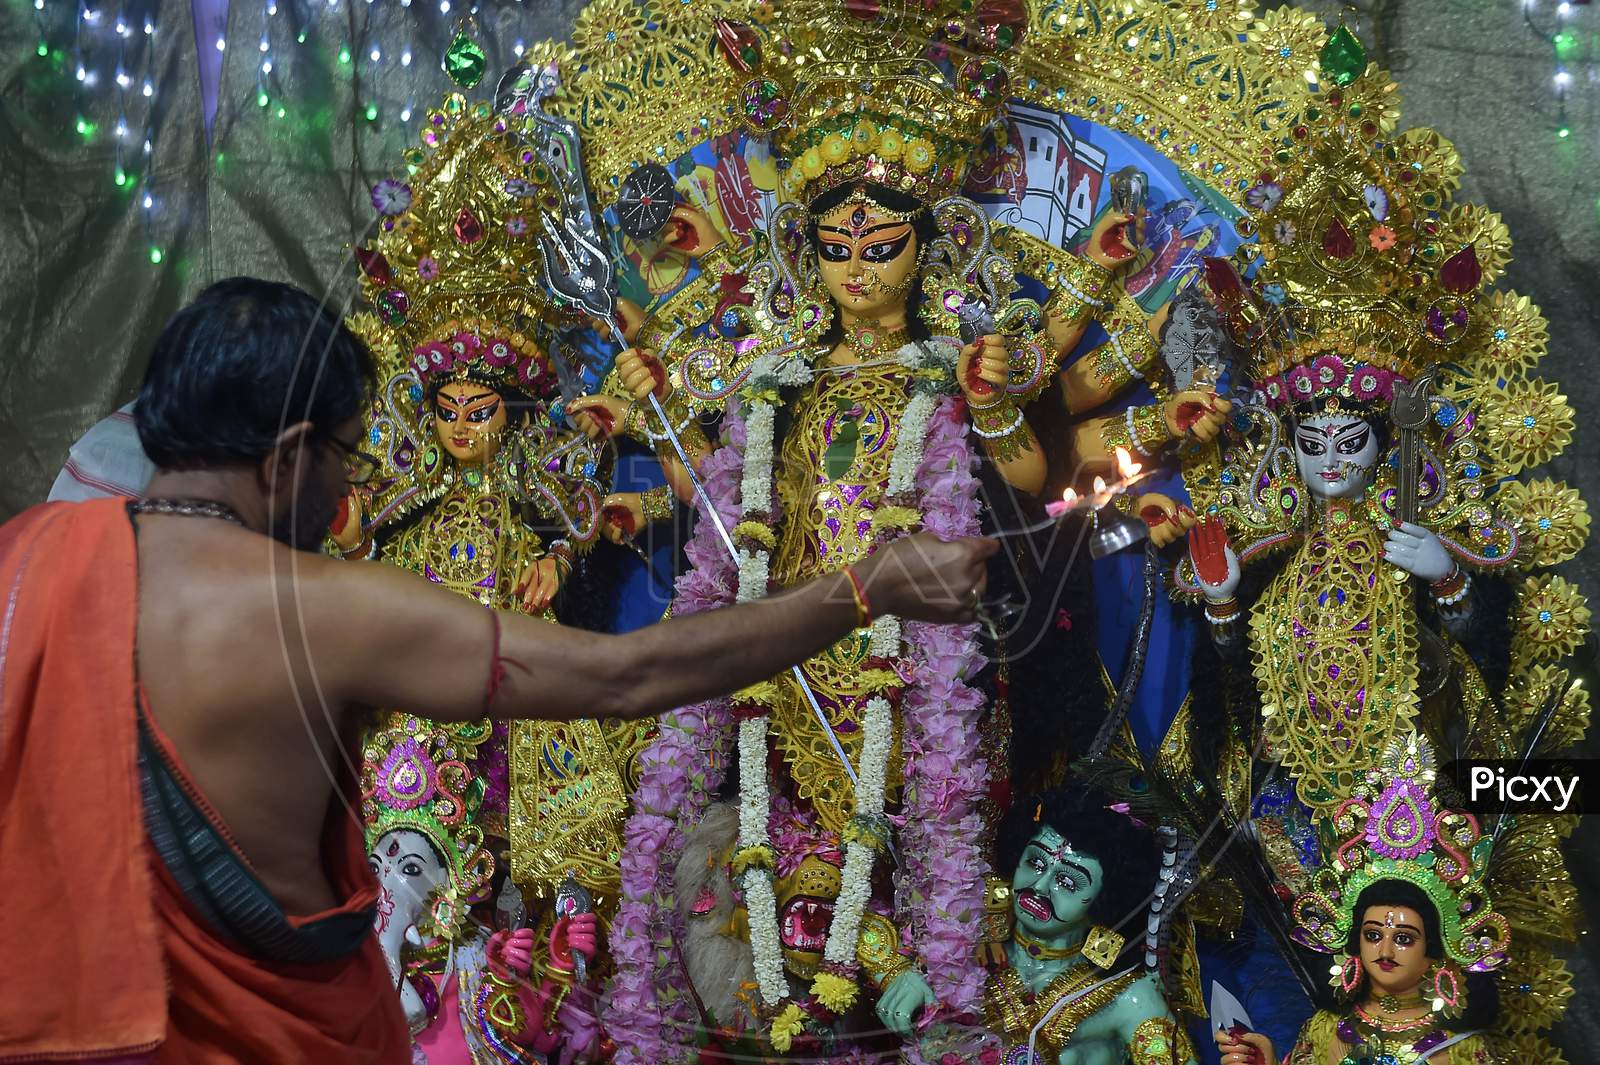 Priest Performs Rituals At A Community Pandal During The Ongoing Durga Puja Festival, In Chennai. Friday,Oct. 23, 2020.